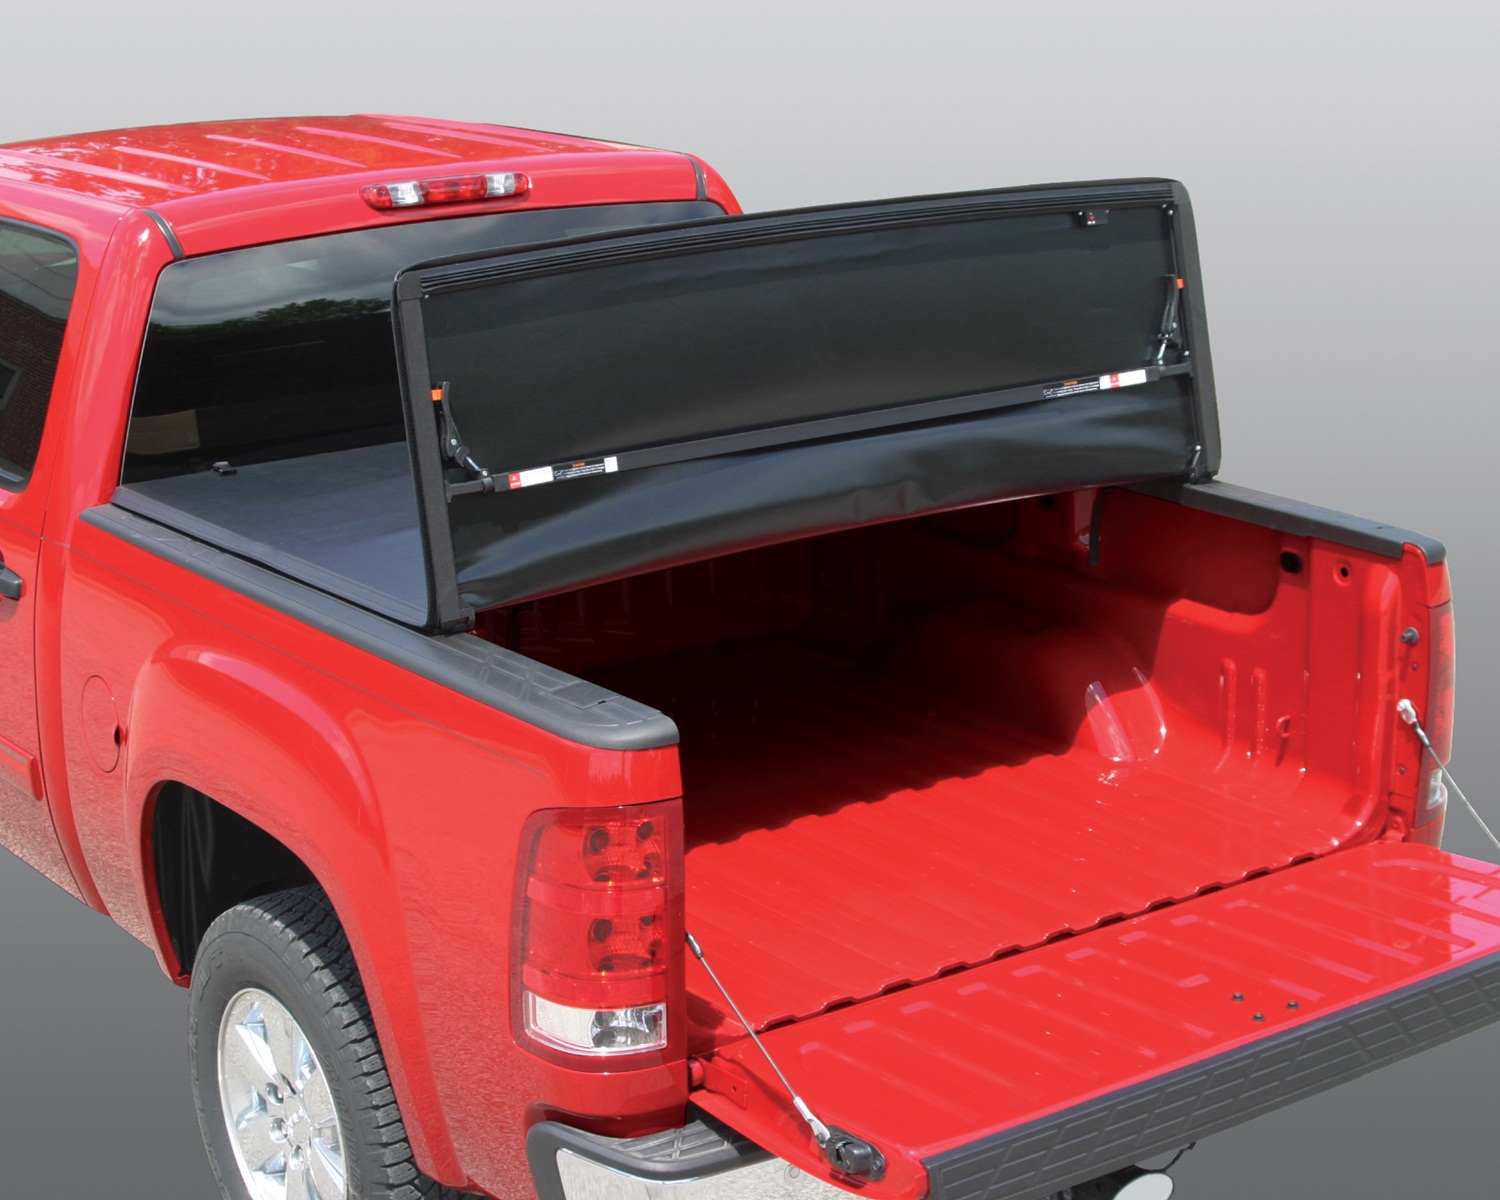 Rugged Liner Rugged Liner FCNFK605 Rugged Cover; Tonneau Cover Fits 05-13 Equator Frontier